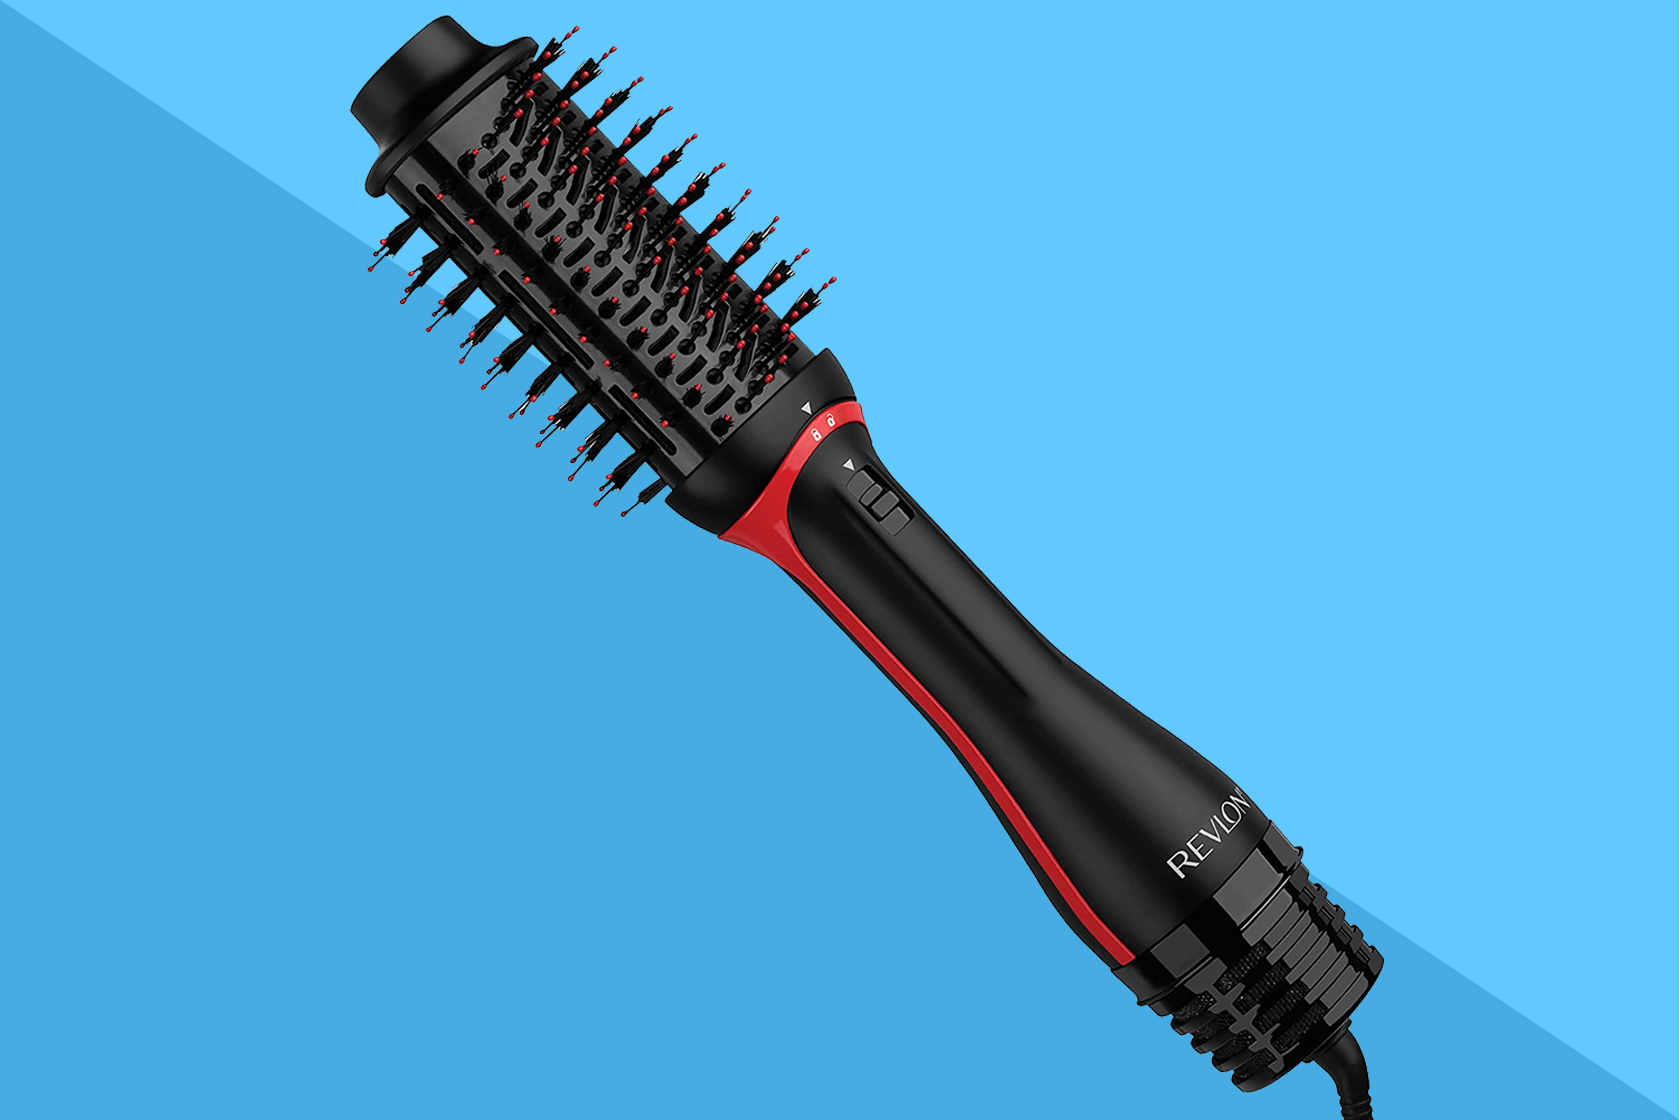 Get Revlon's cult-favorite One-Step Hair Volumizer for 31% off during the  Amazon Prime Early Access Sale